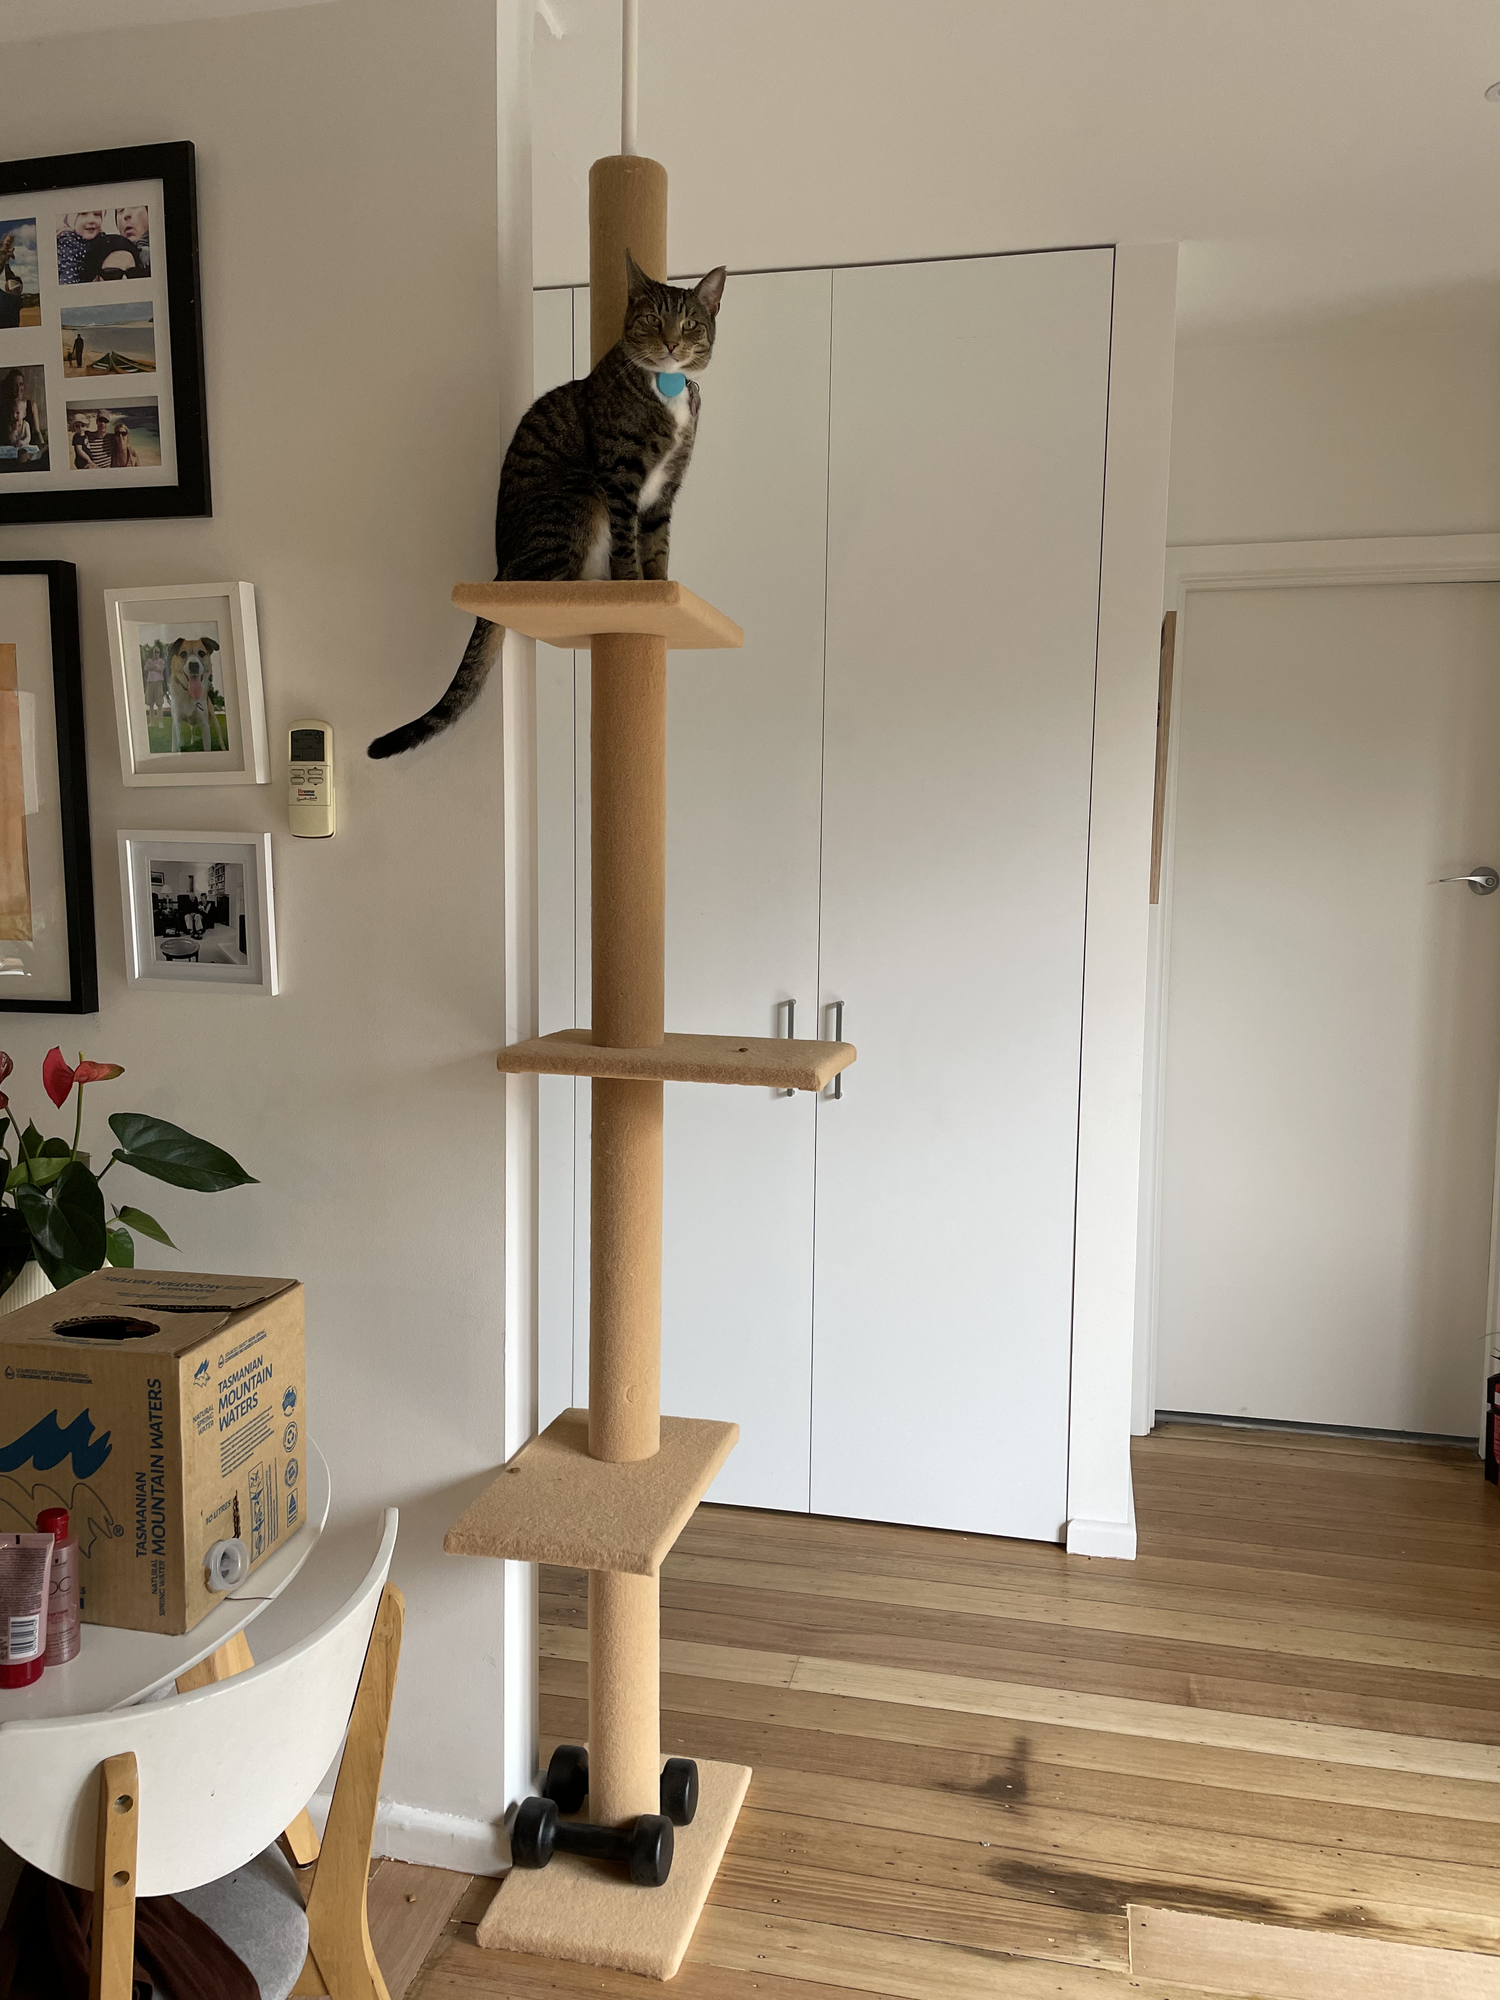 A cat at the top of a cat tower